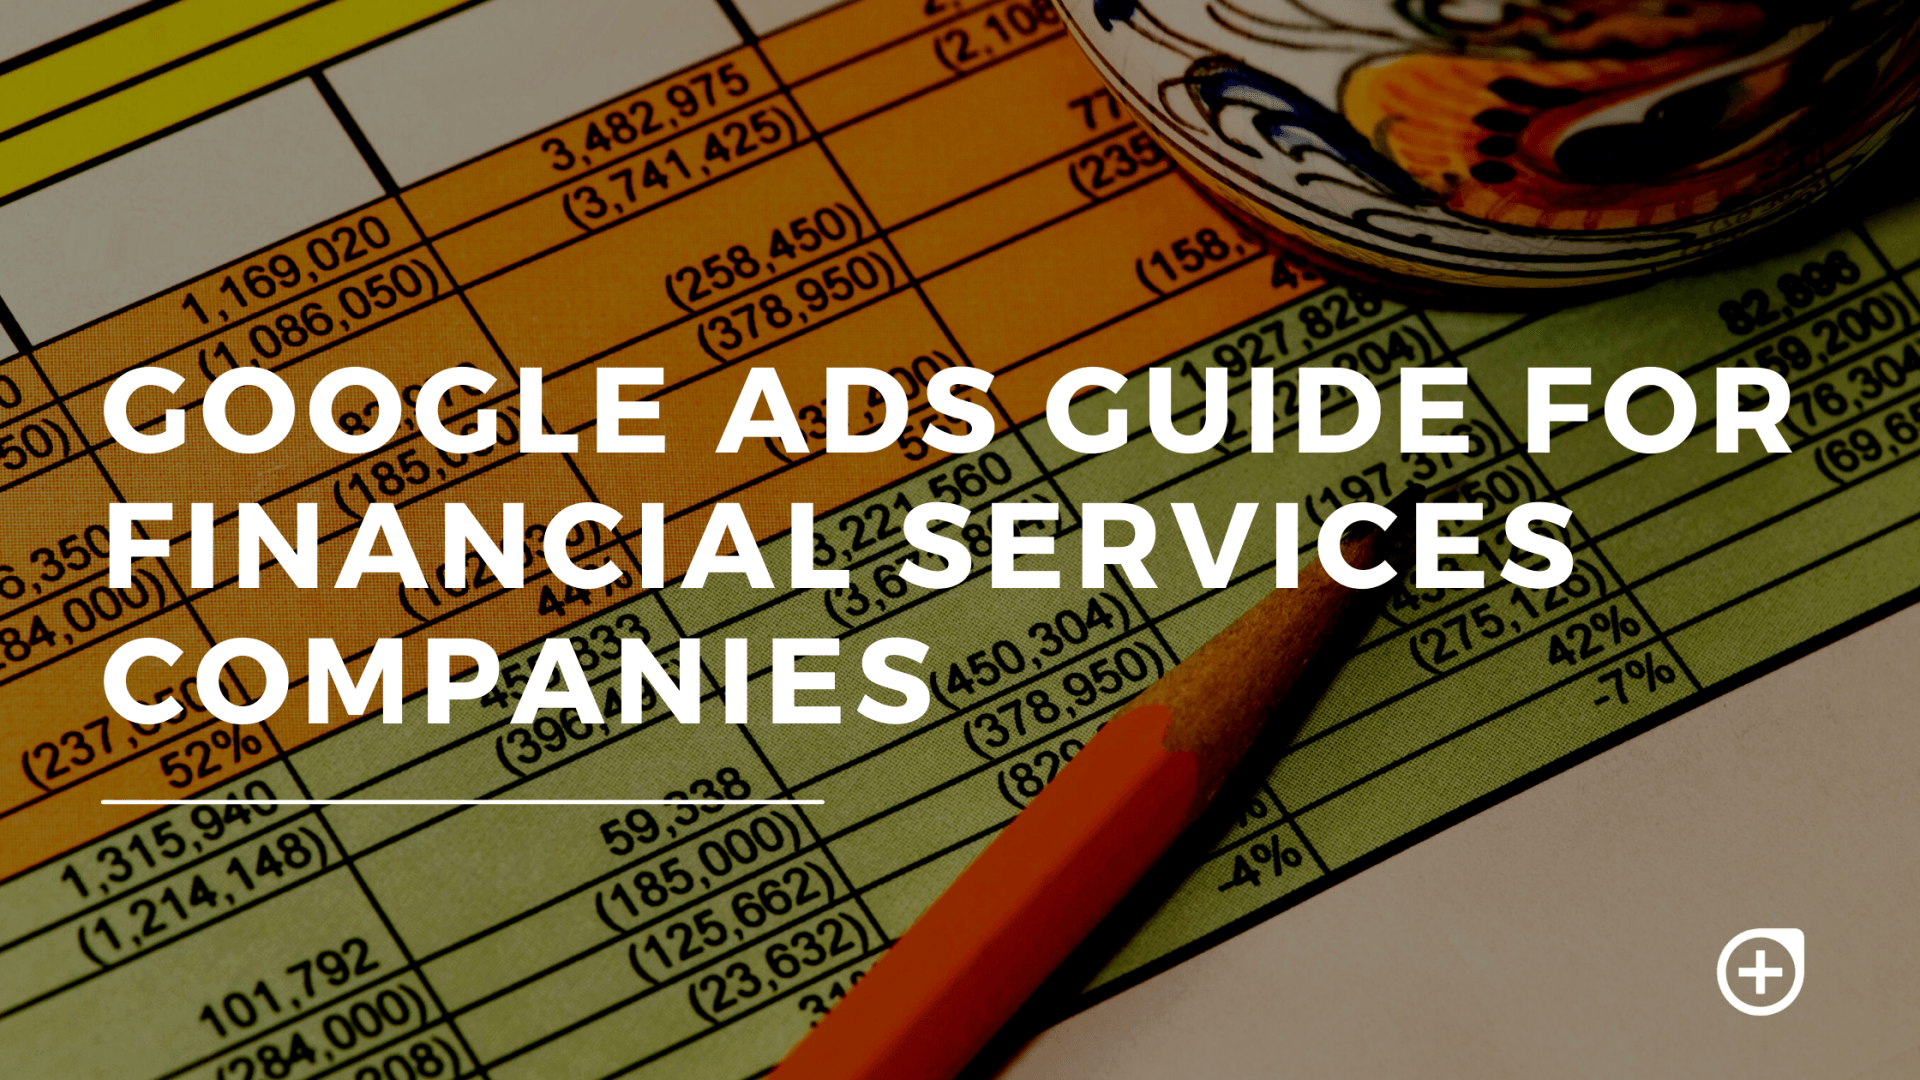 Google Ads Guide for Financial Services